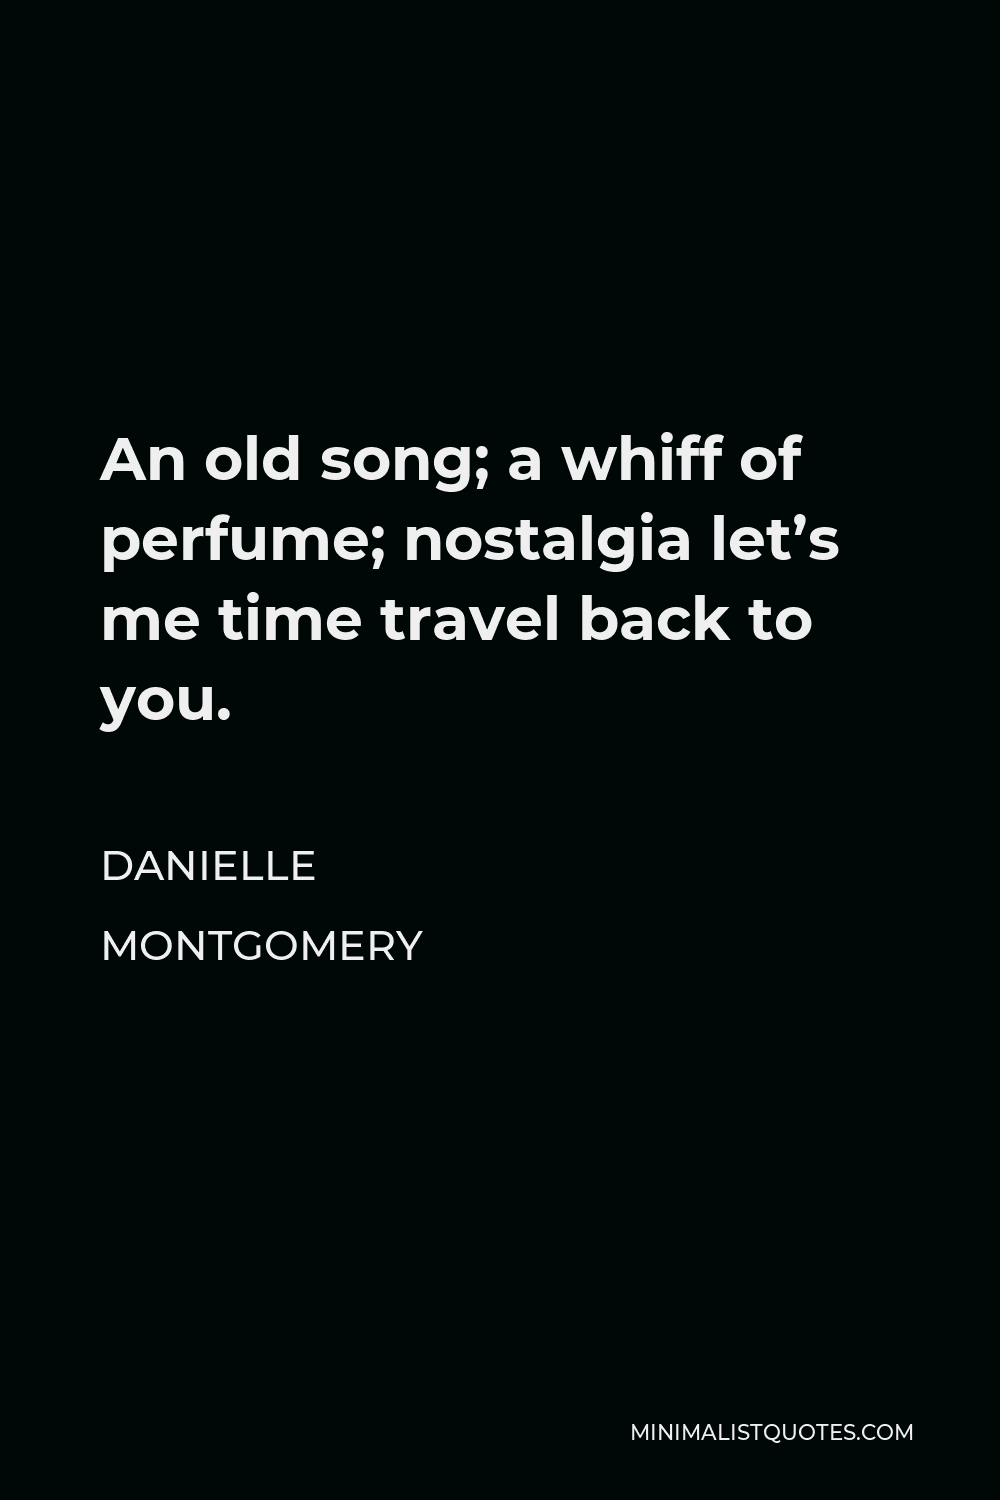 Danielle Montgomery Quote - An old song; a whiff of perfume; nostalgia let’s me time travel back to you.